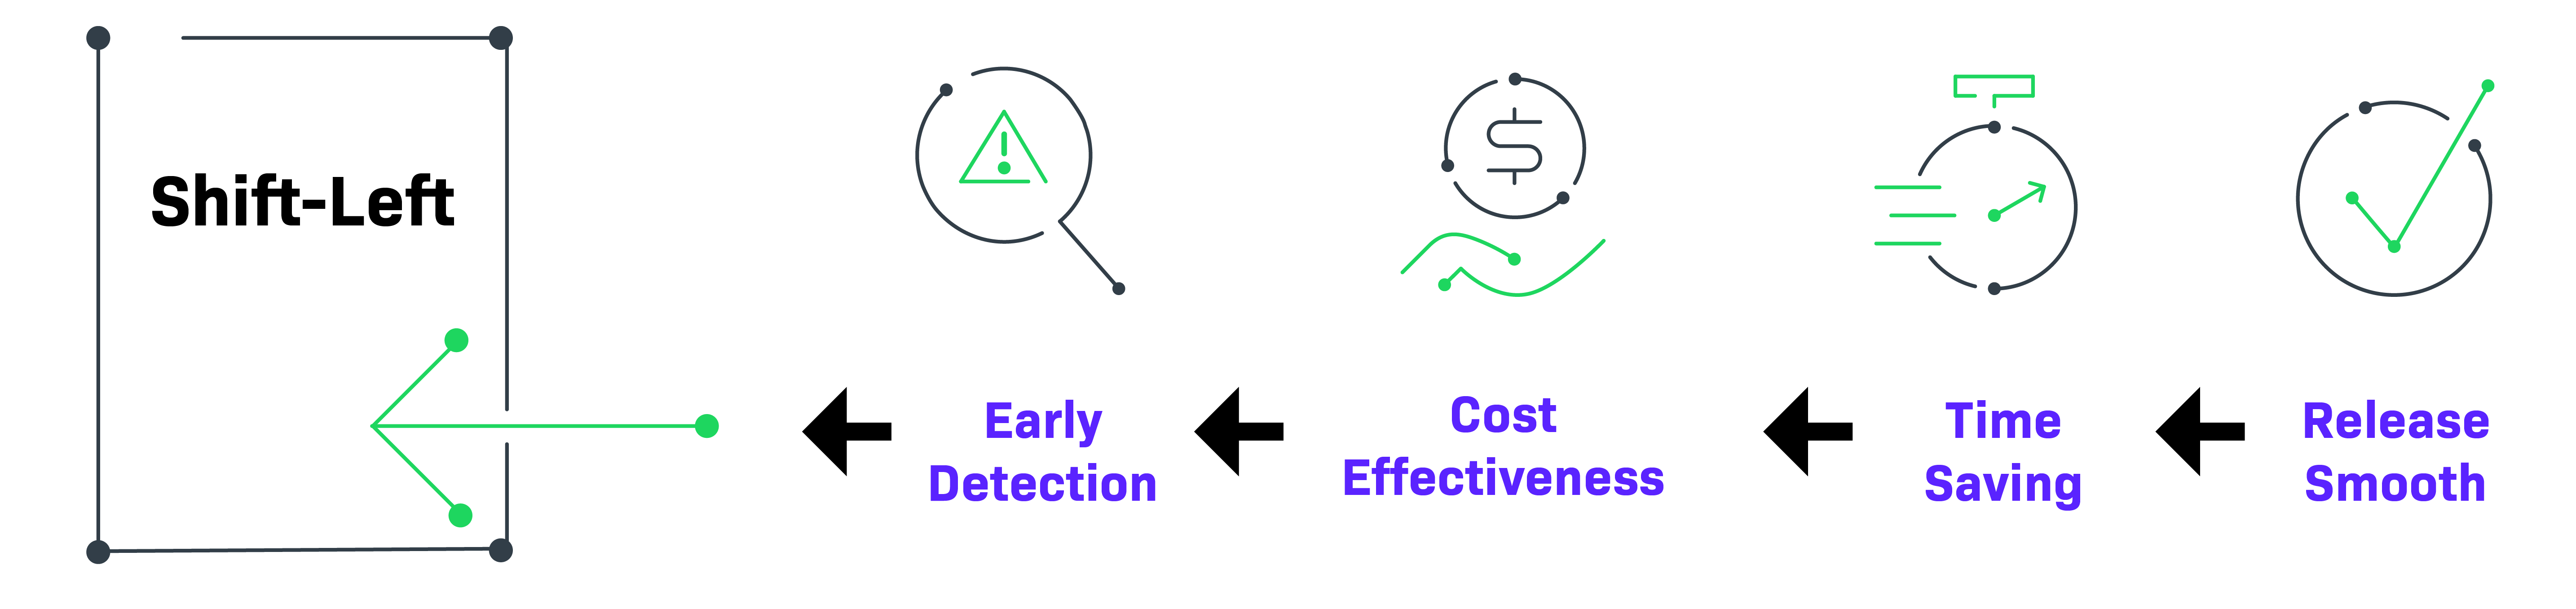 Shift-Left ← Early Detection ← Cost Effectiveness ← Time Saving ← Release Smooth